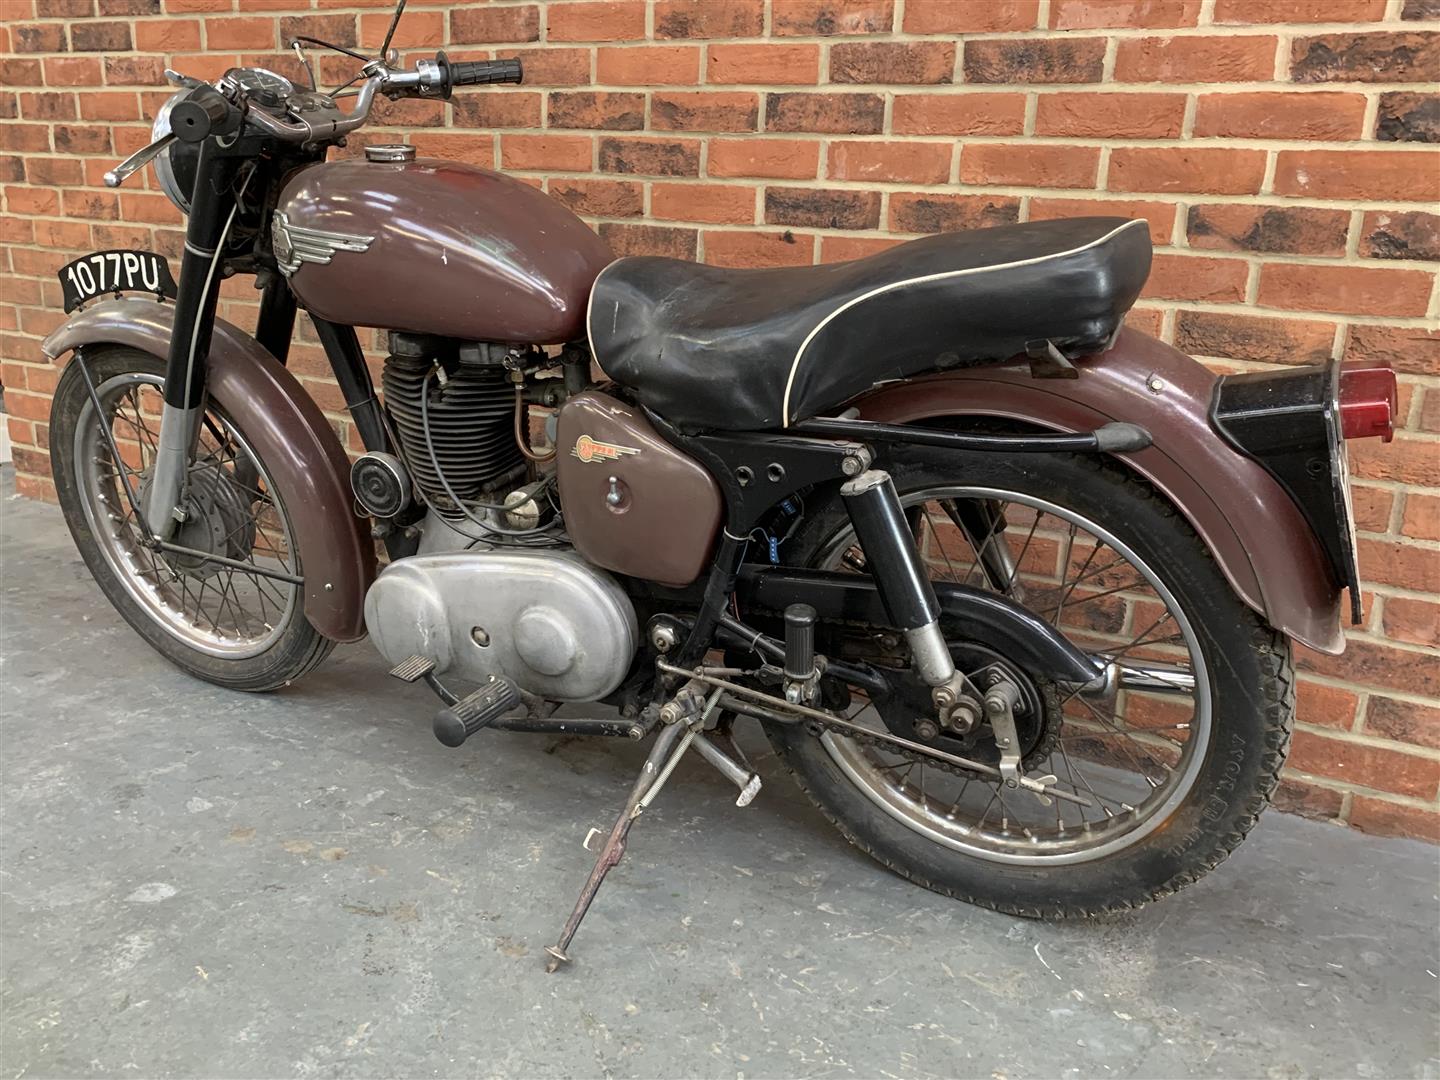 1959 Royal Enfield Clipper 350cc - Image 4 of 16